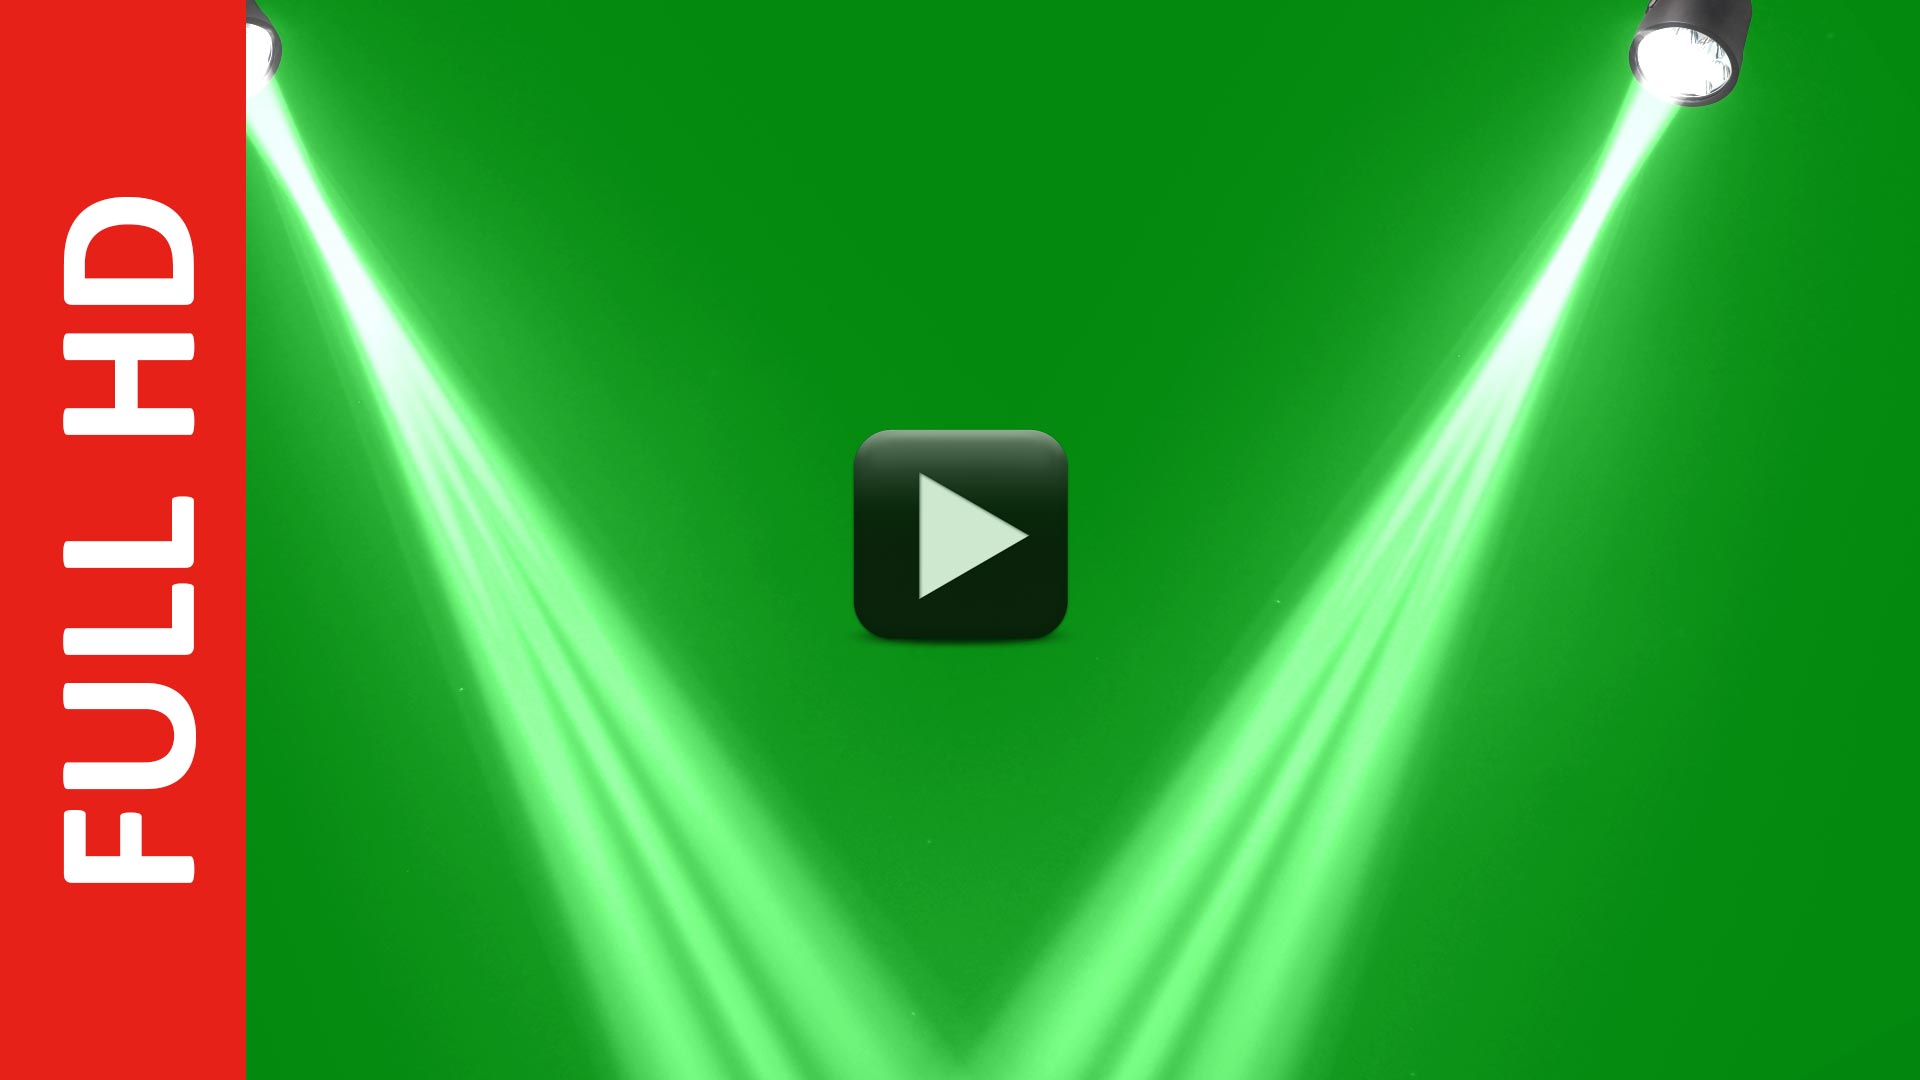 Concert Stage Lights Green Screen Animated Background | All Design Creative